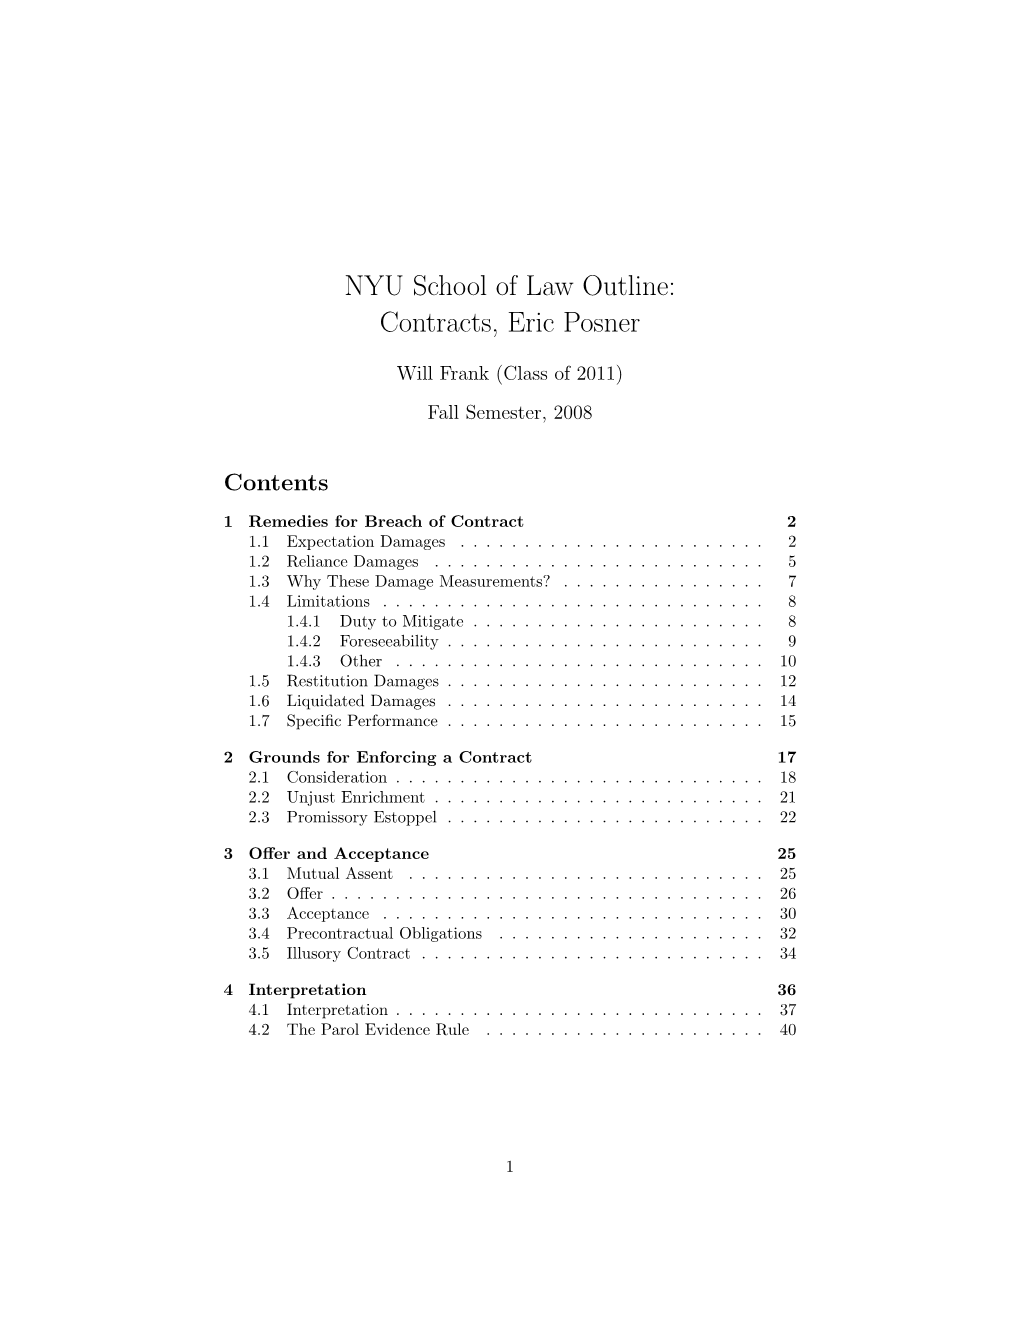 NYU School of Law Outline: Contracts, Eric Posner